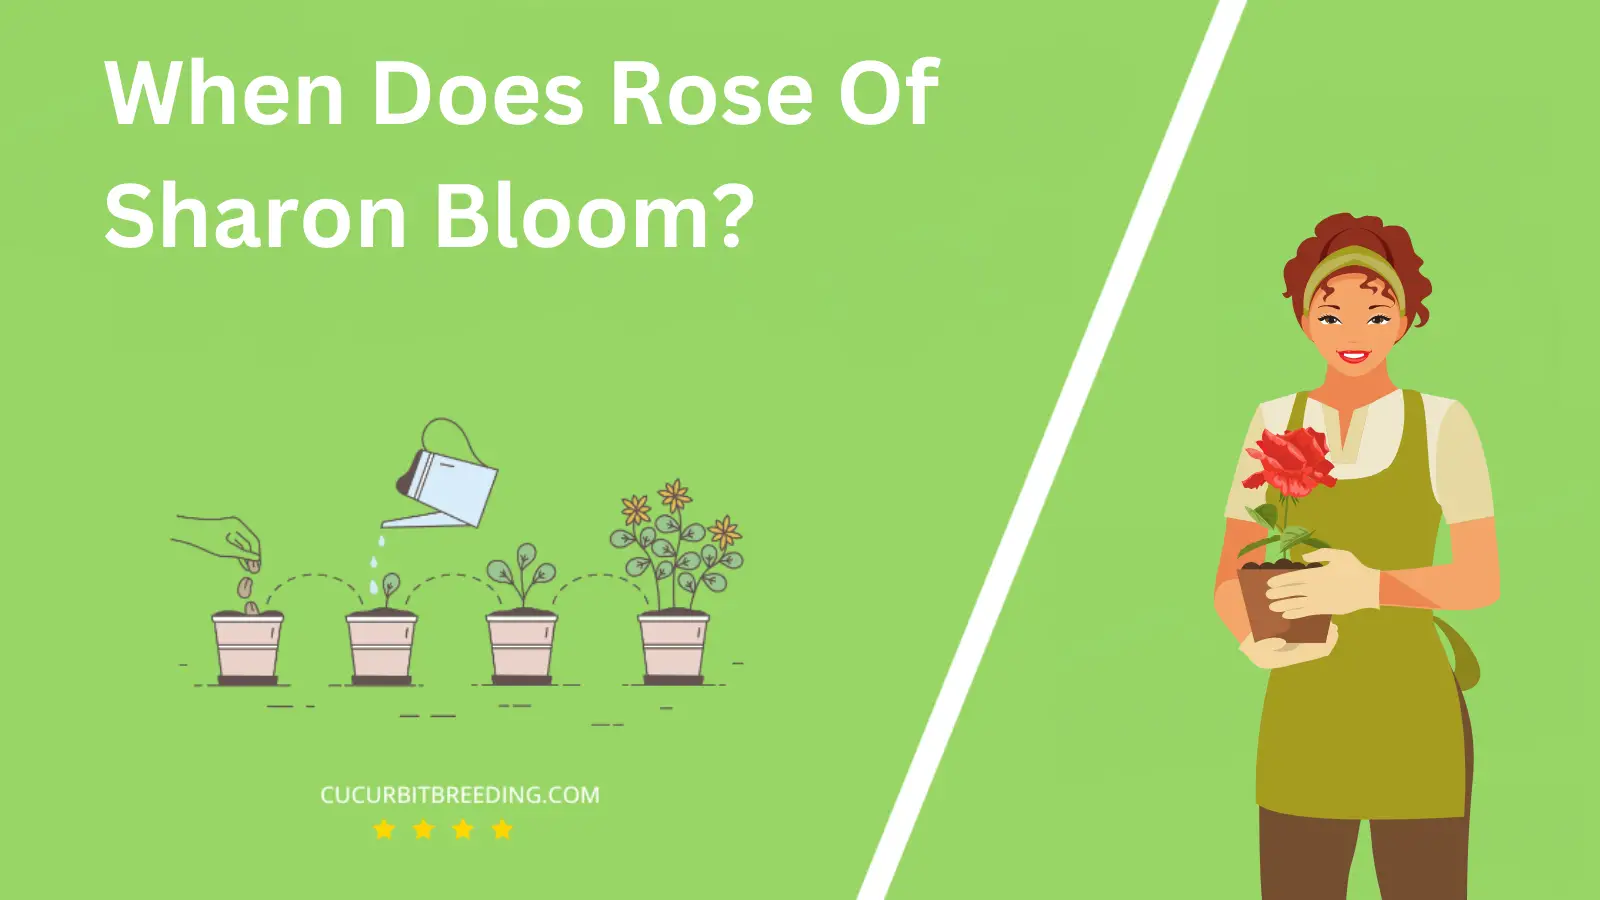 When Does Rose Of Sharon Bloom?